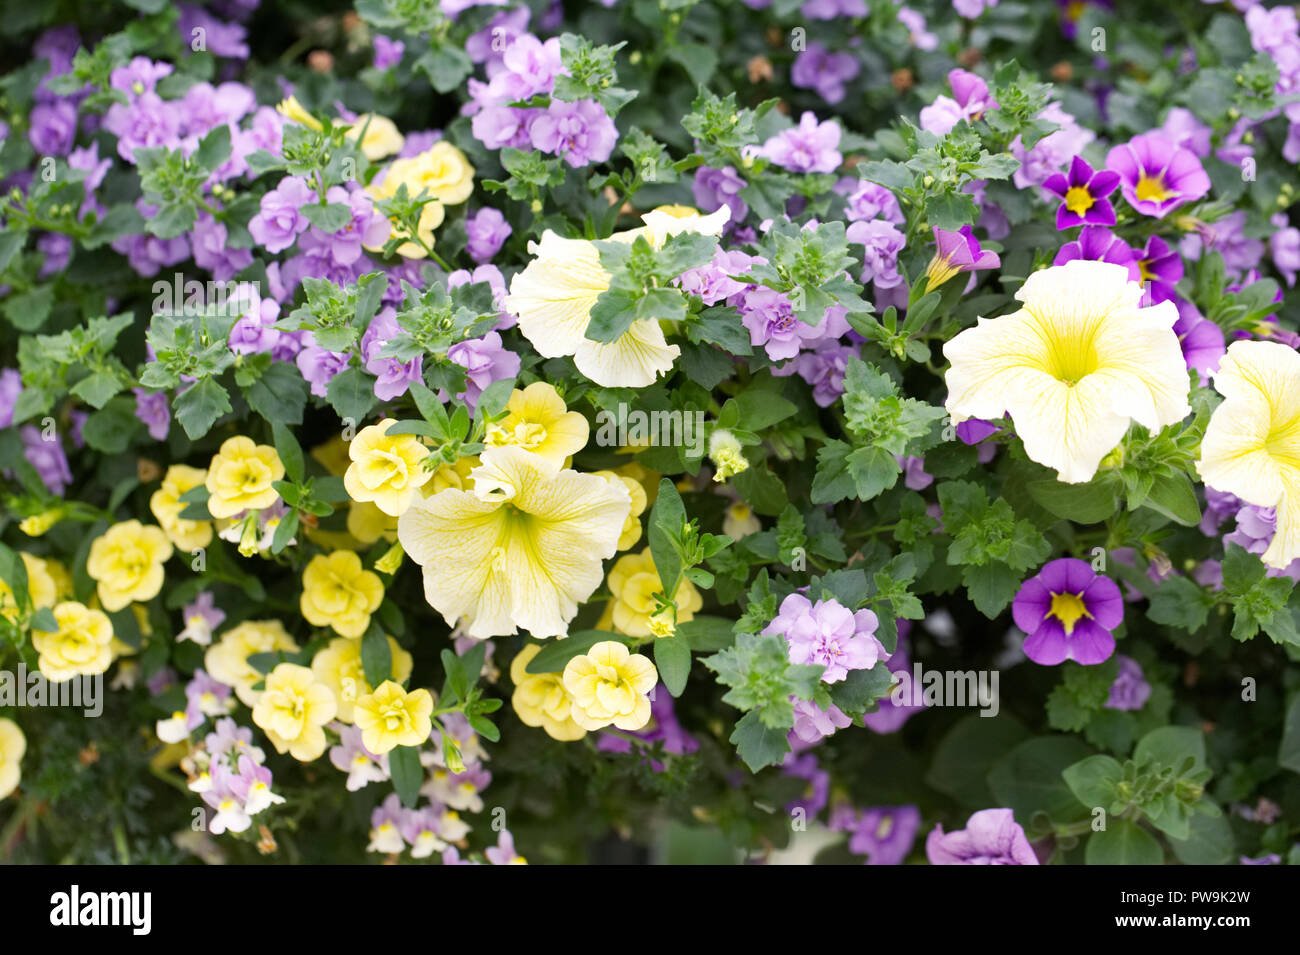 Petunias and Calibrachoa. Million bells and Petunia flowers in a hanging basket. Stock Photo